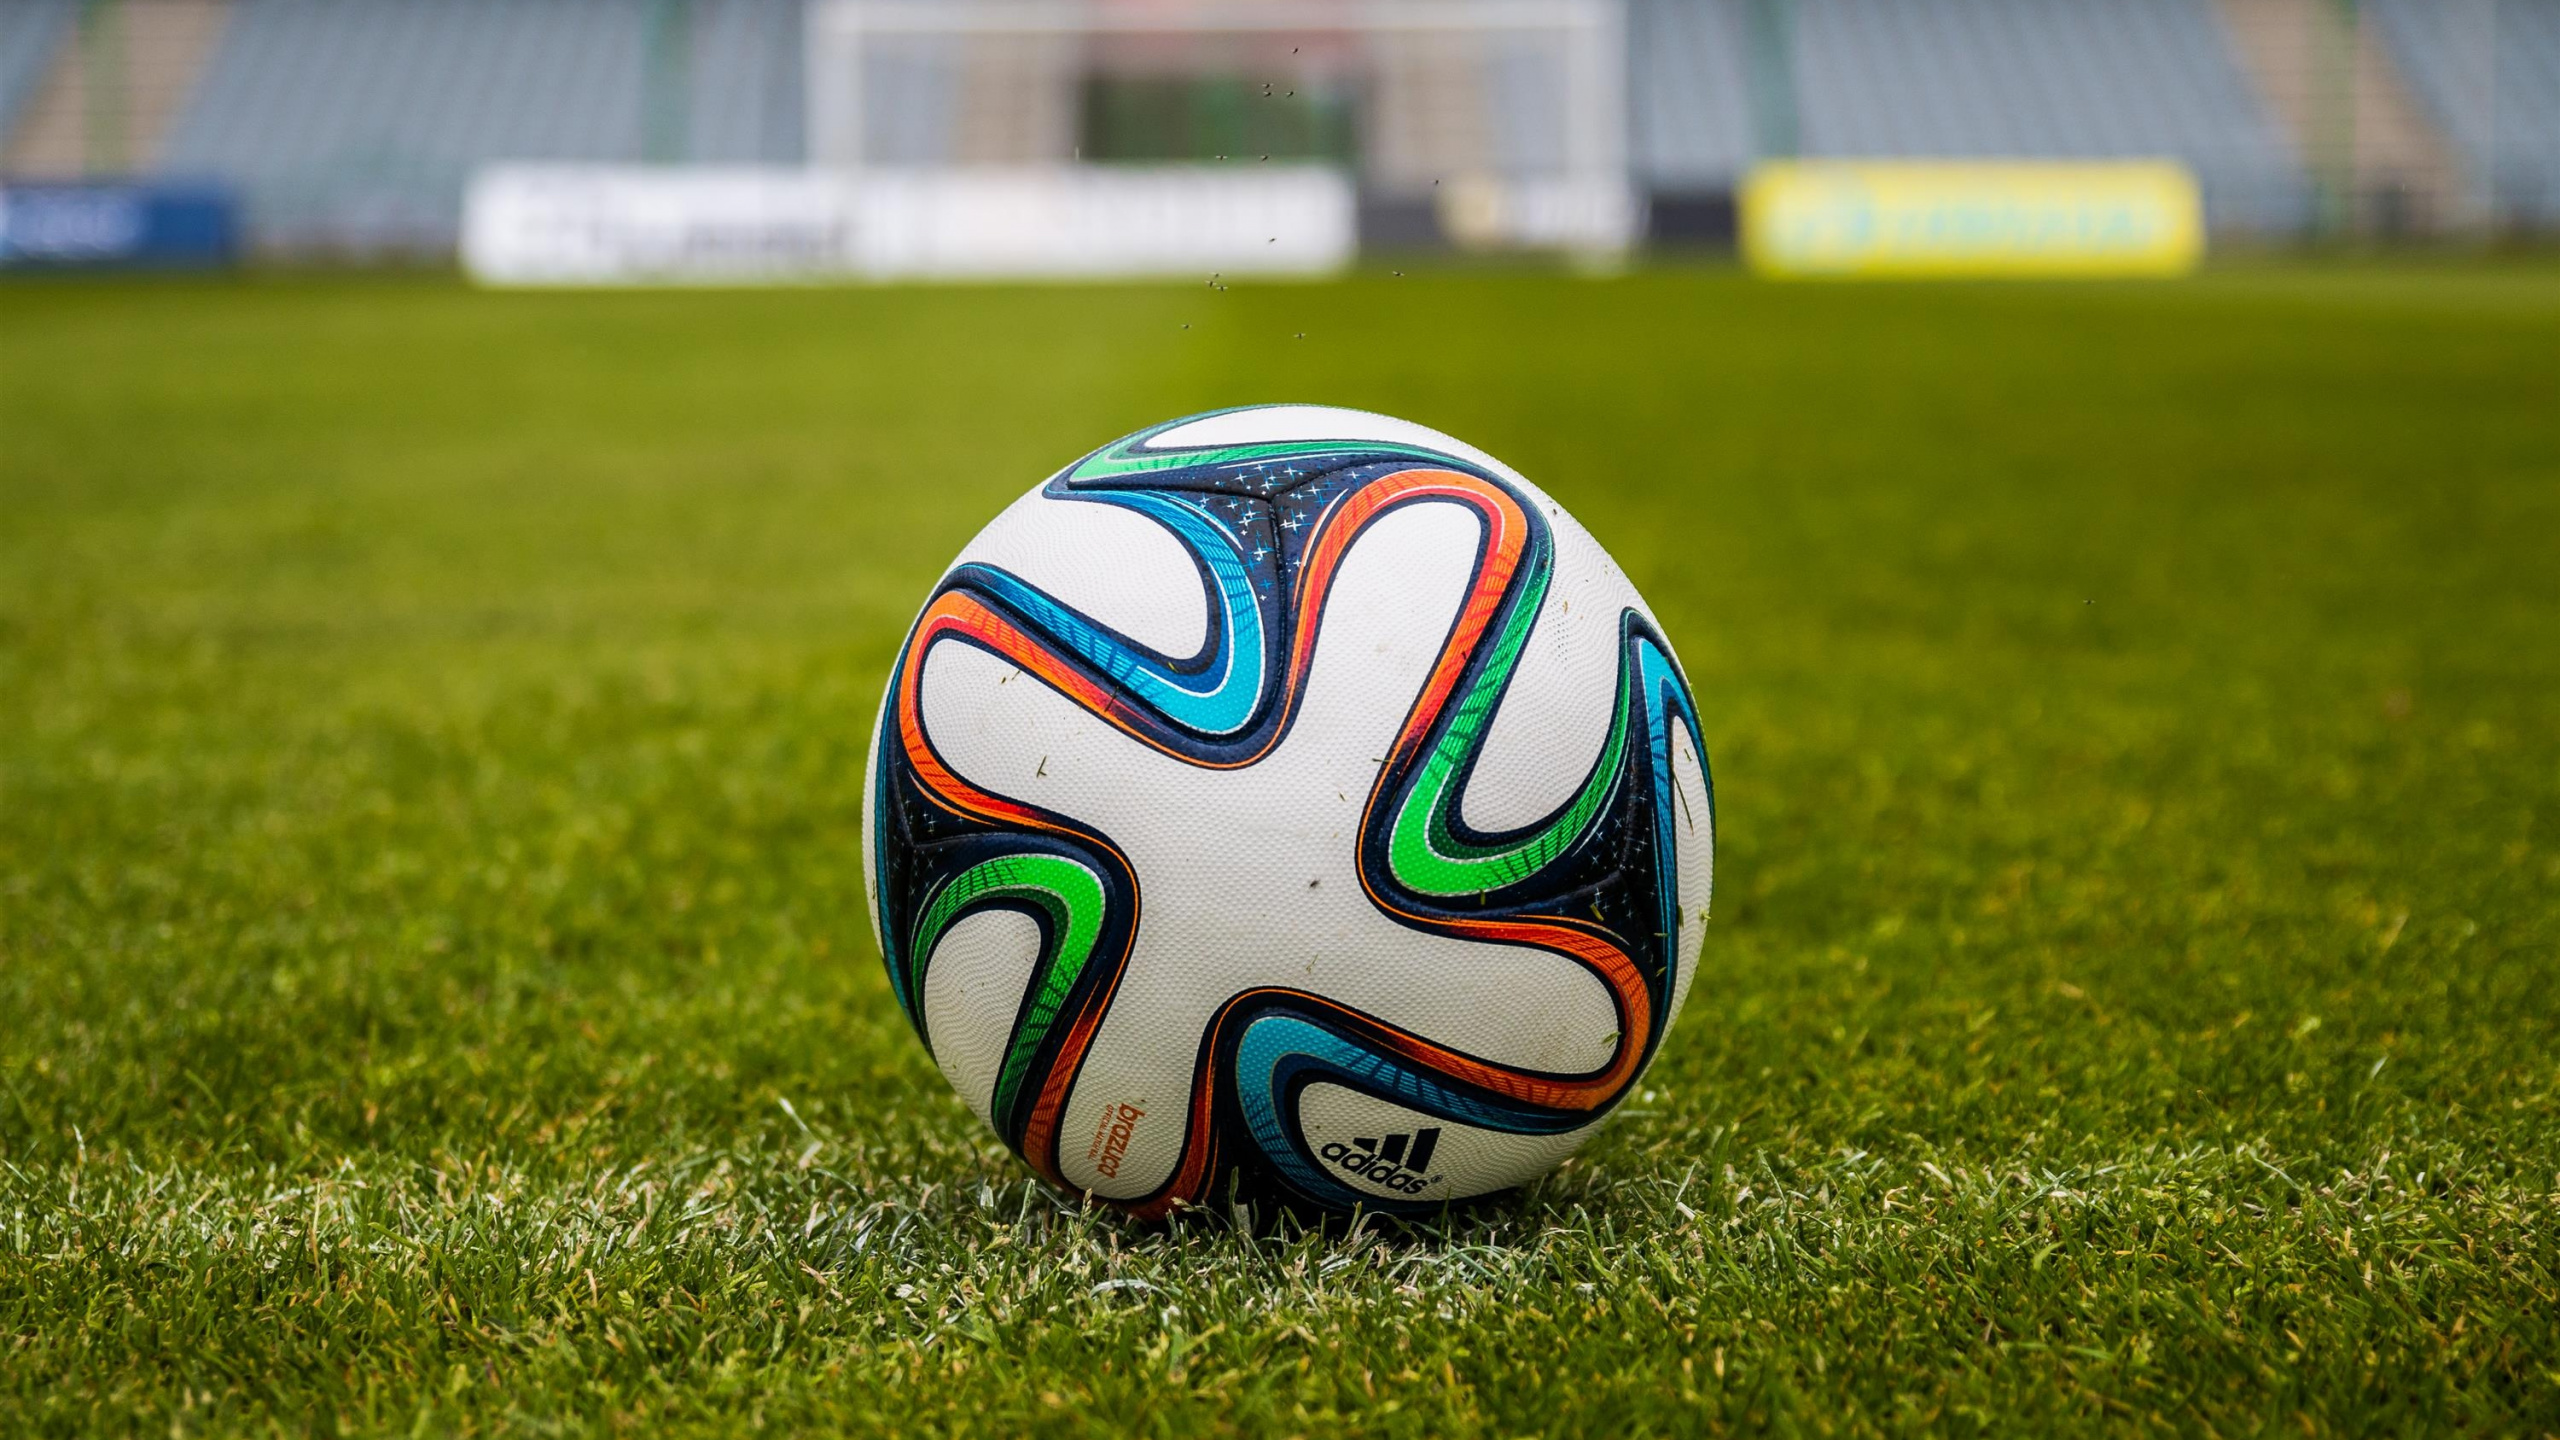 White Blue and Red Soccer Ball on Green Grass Field During Daytime. Wallpaper in 2560x1440 Resolution